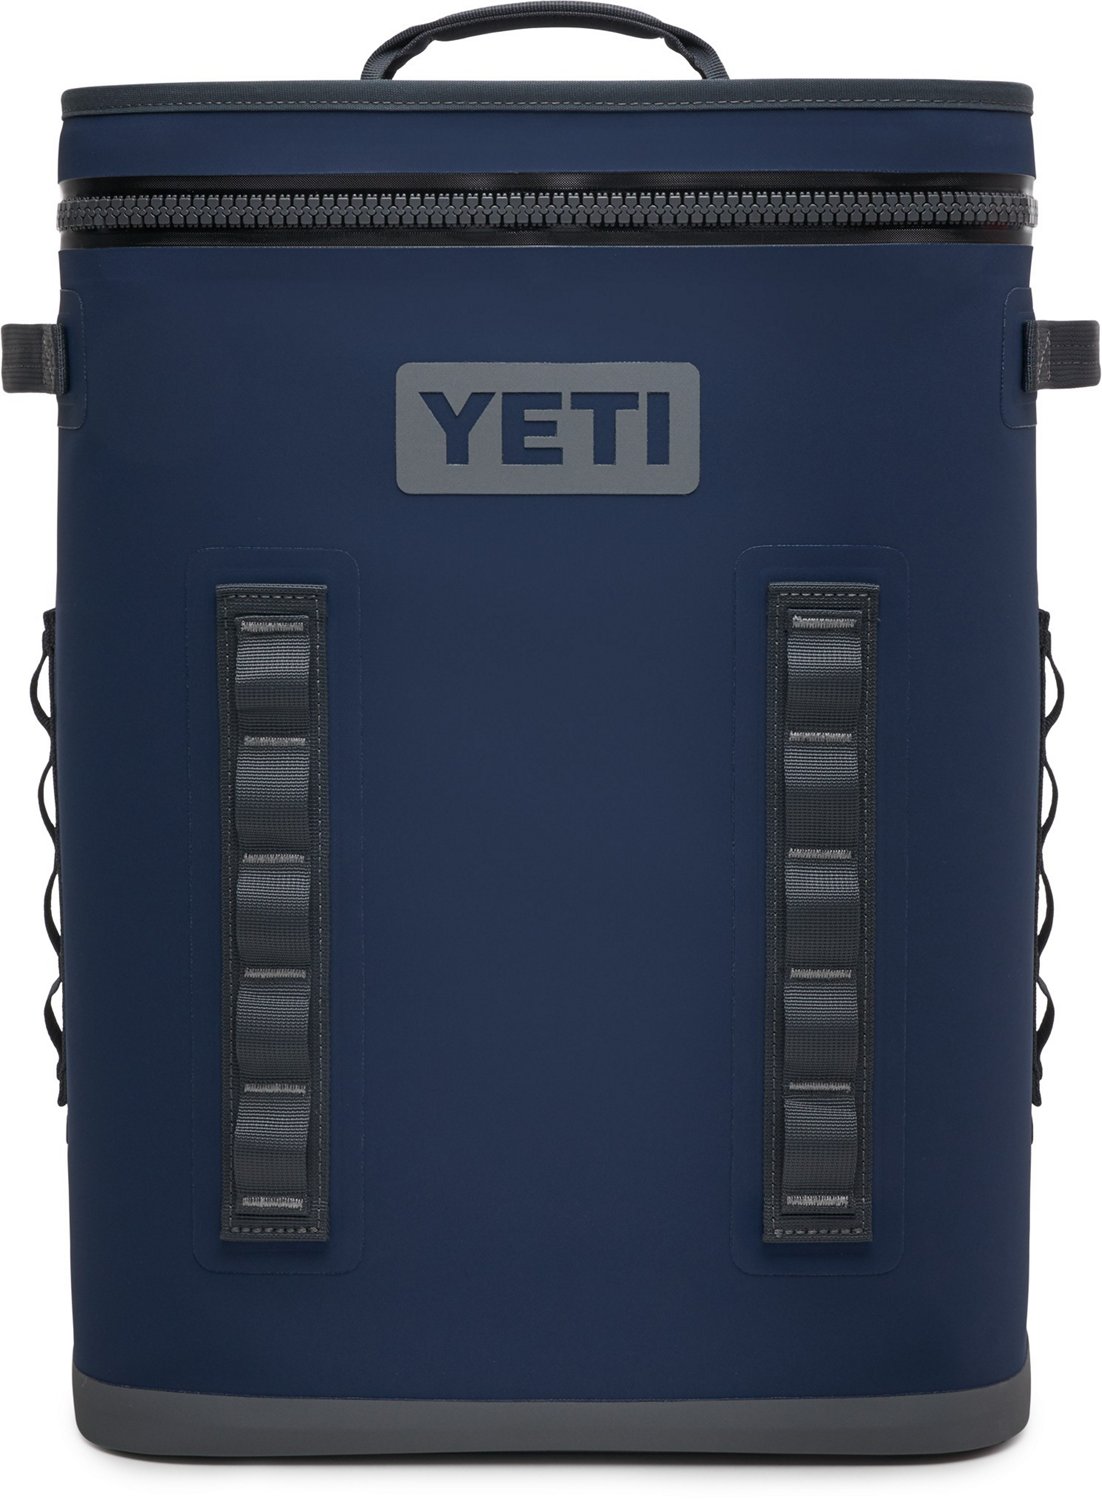 Large \u0026 Small Soft-Sided Coolers | Academy